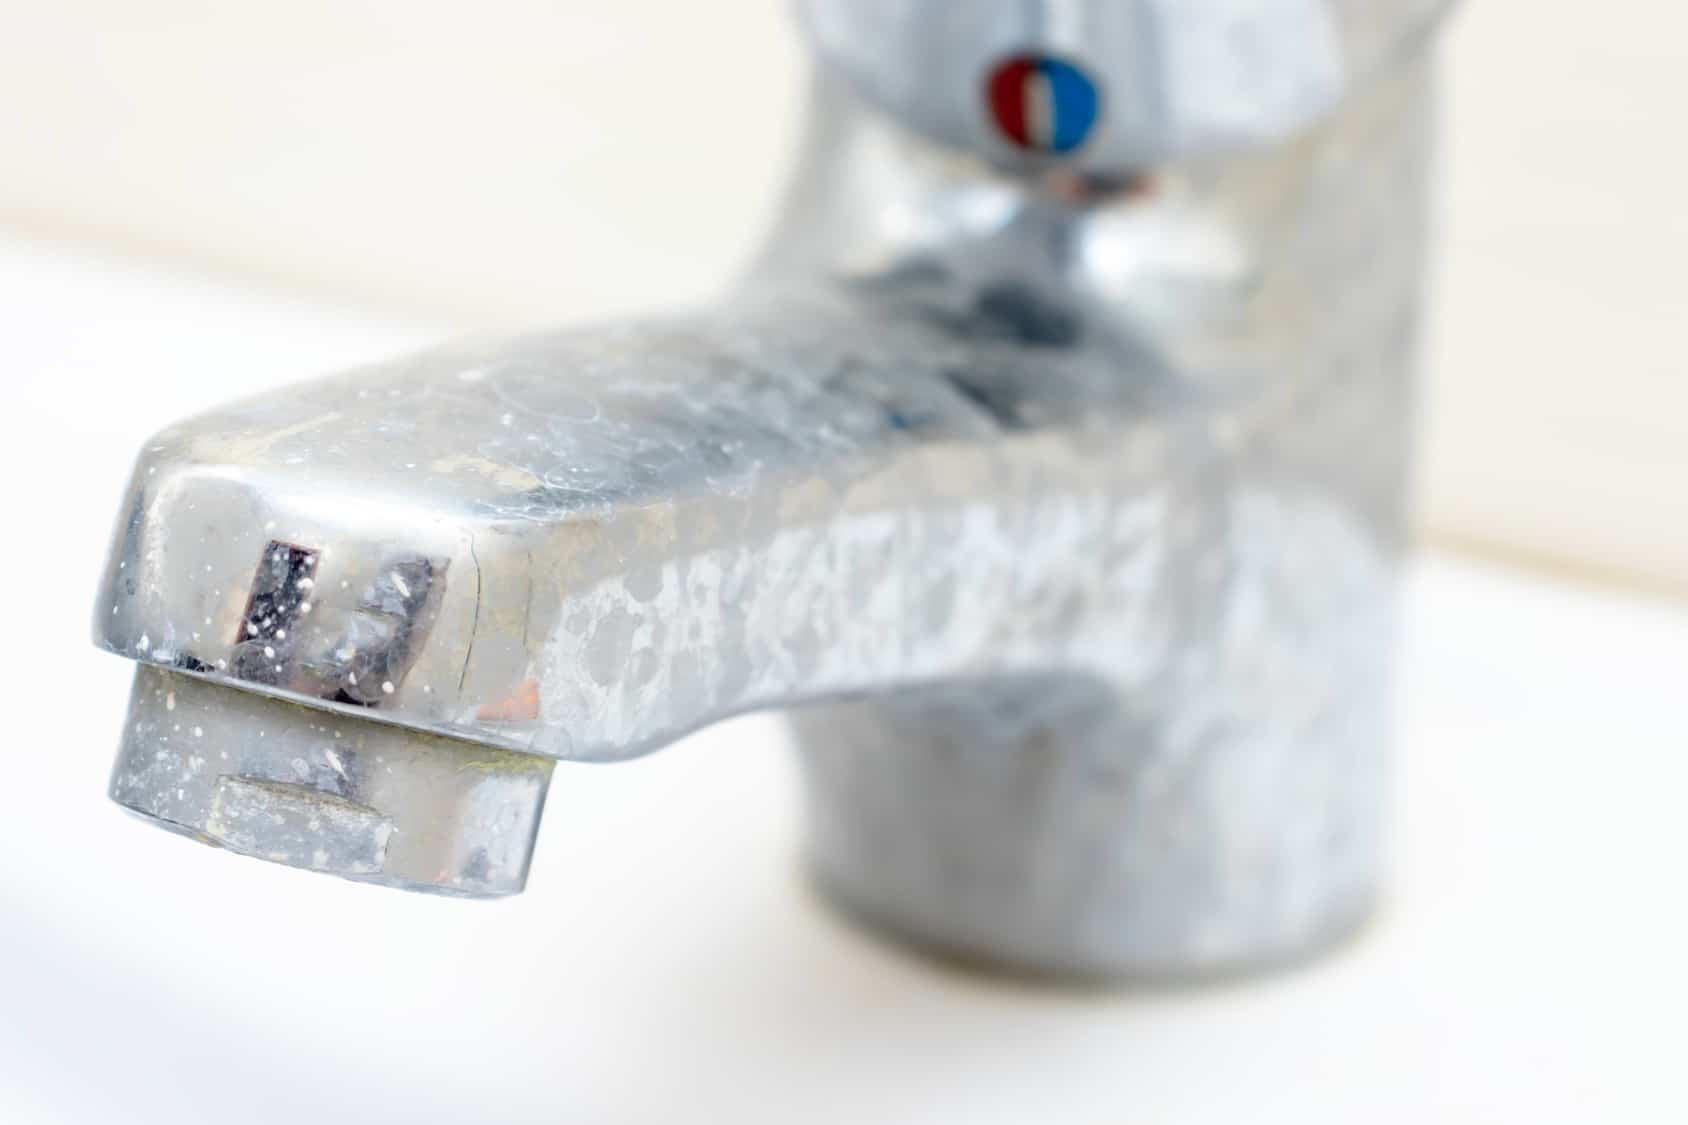 Scale buildup on a faucet caused by hard water.